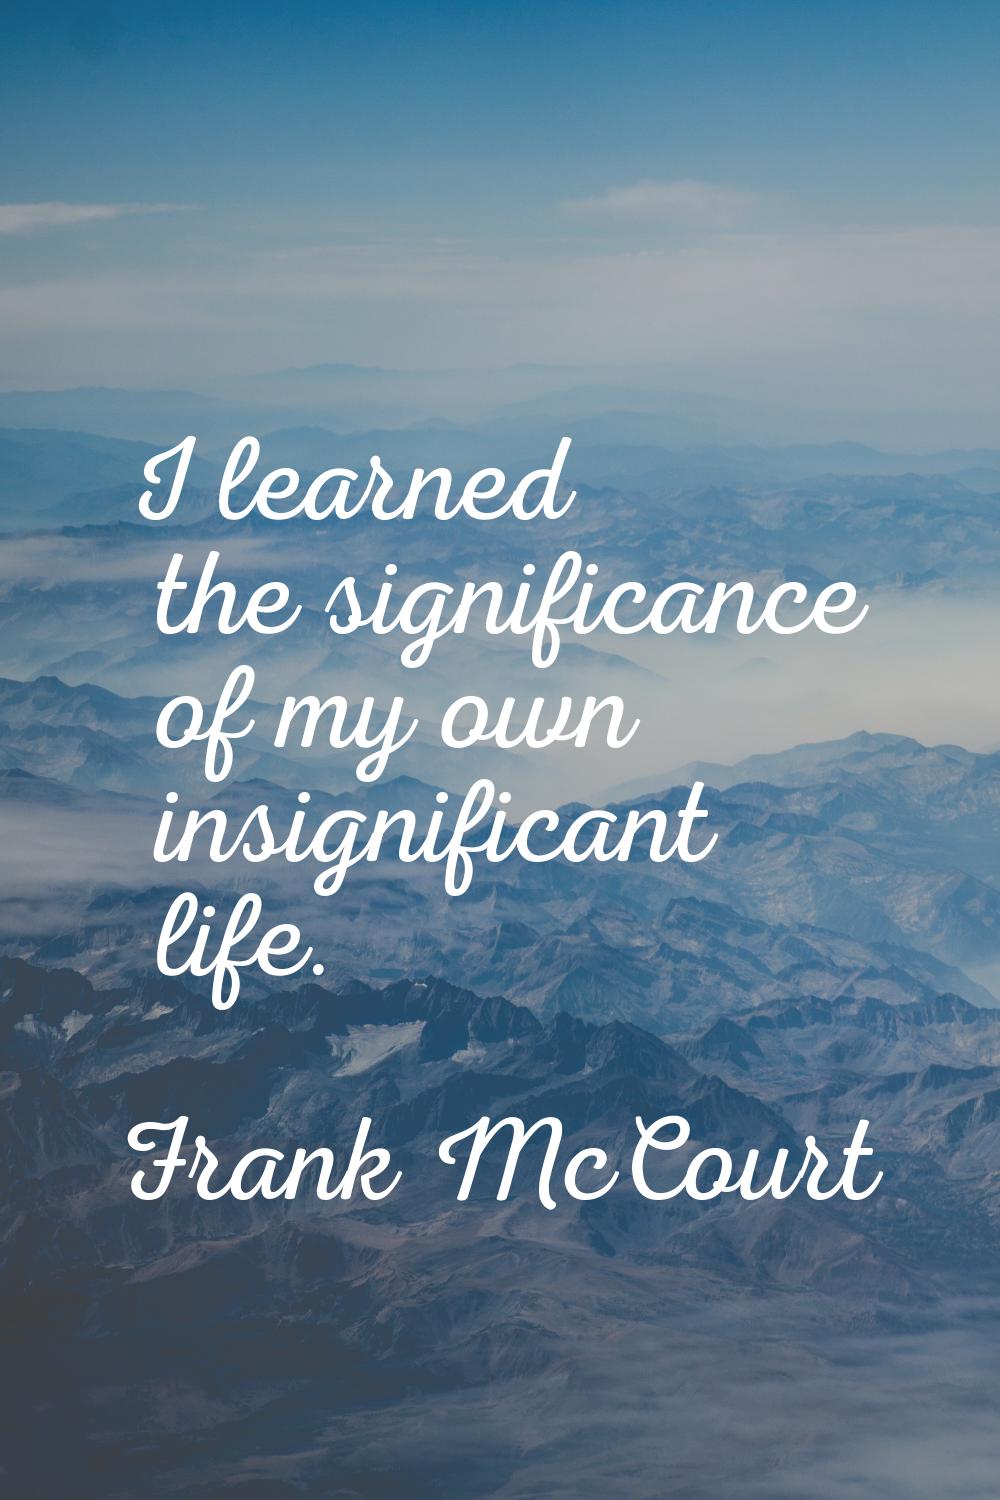 I learned the significance of my own insignificant life.